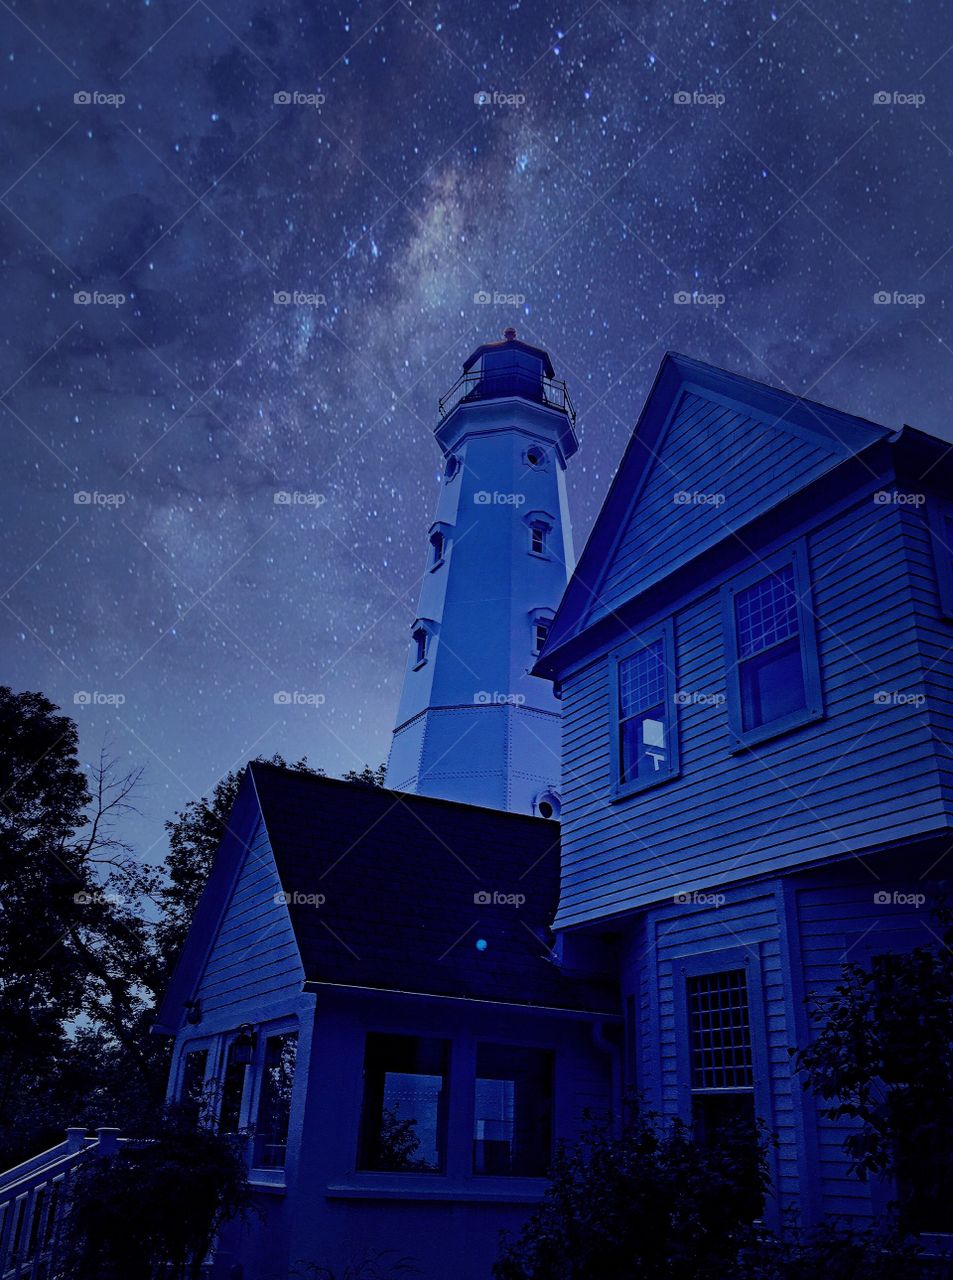 View of a house and lighthouse at night